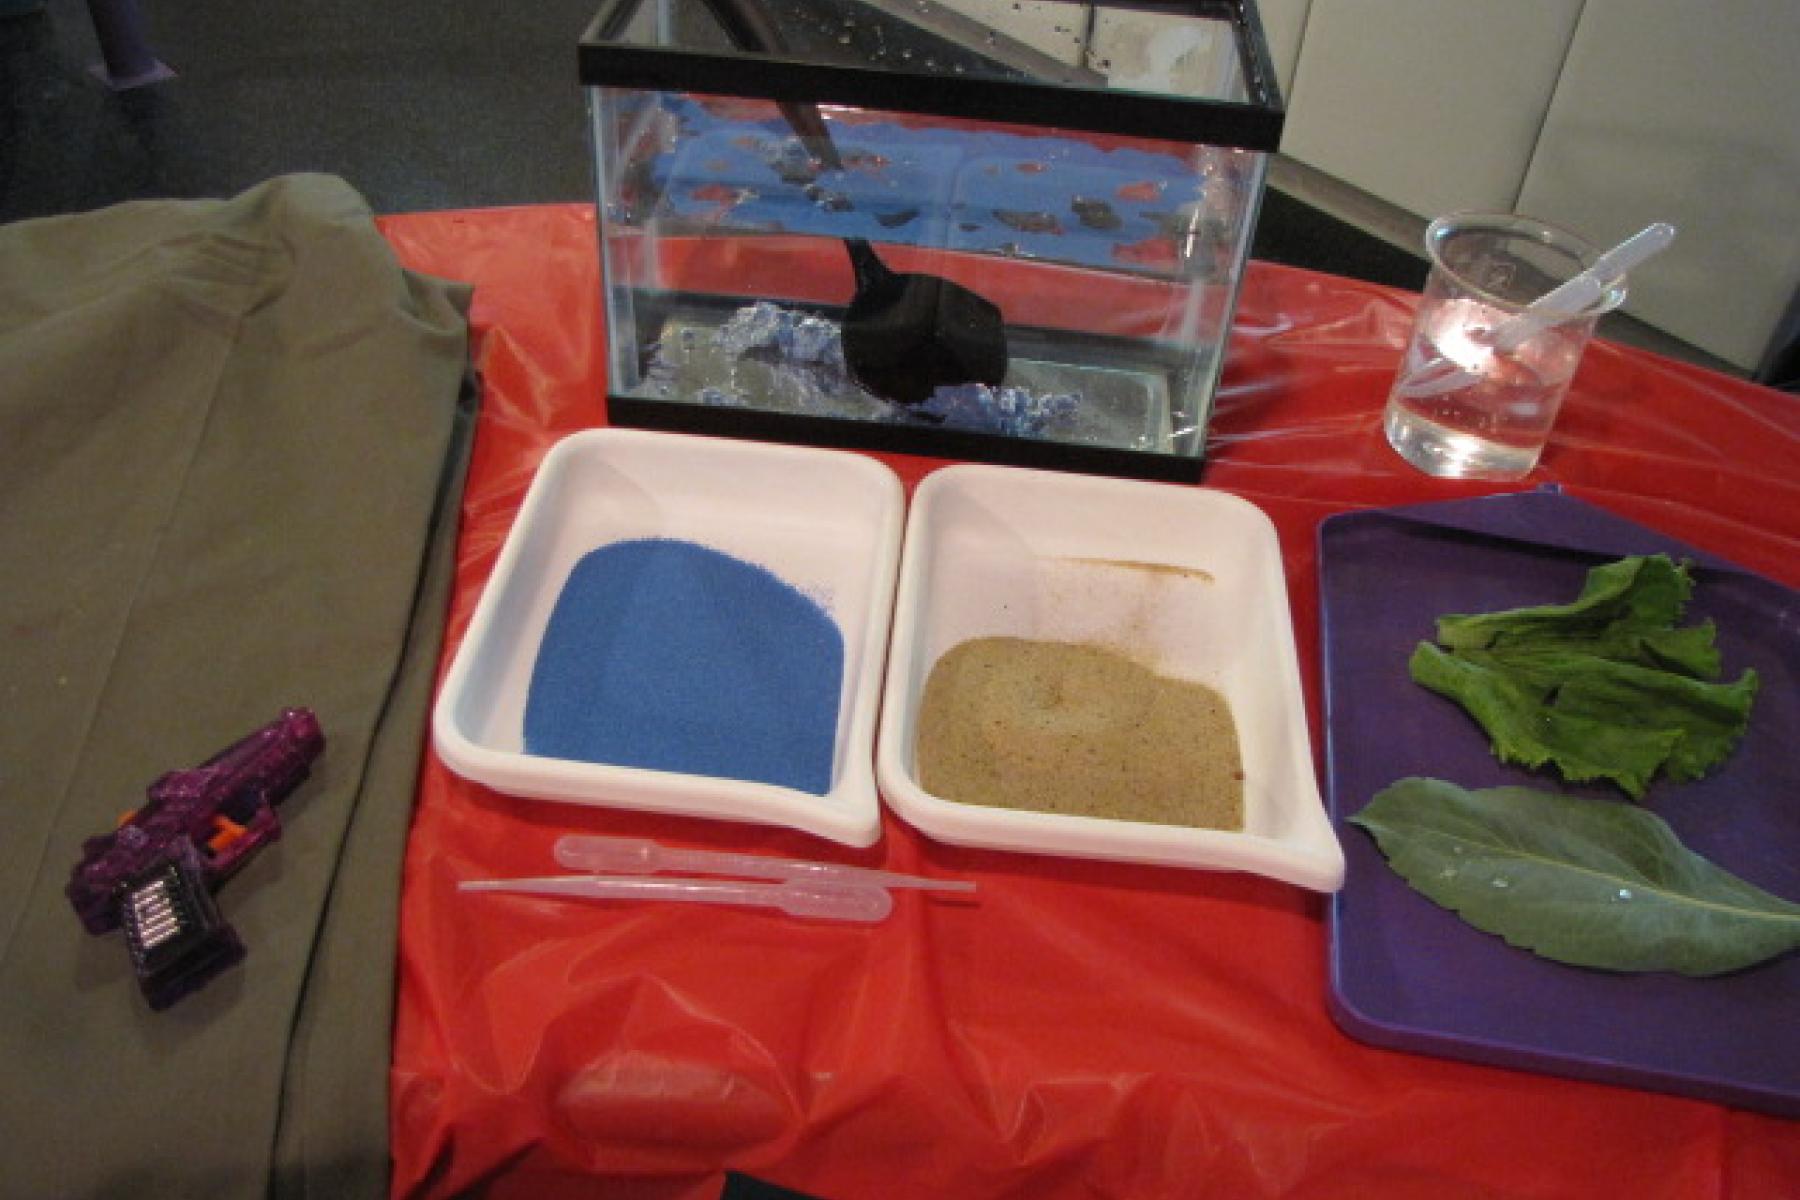 Sand, Plants, and pants  activity components including water tank, sand, pants, and plants.